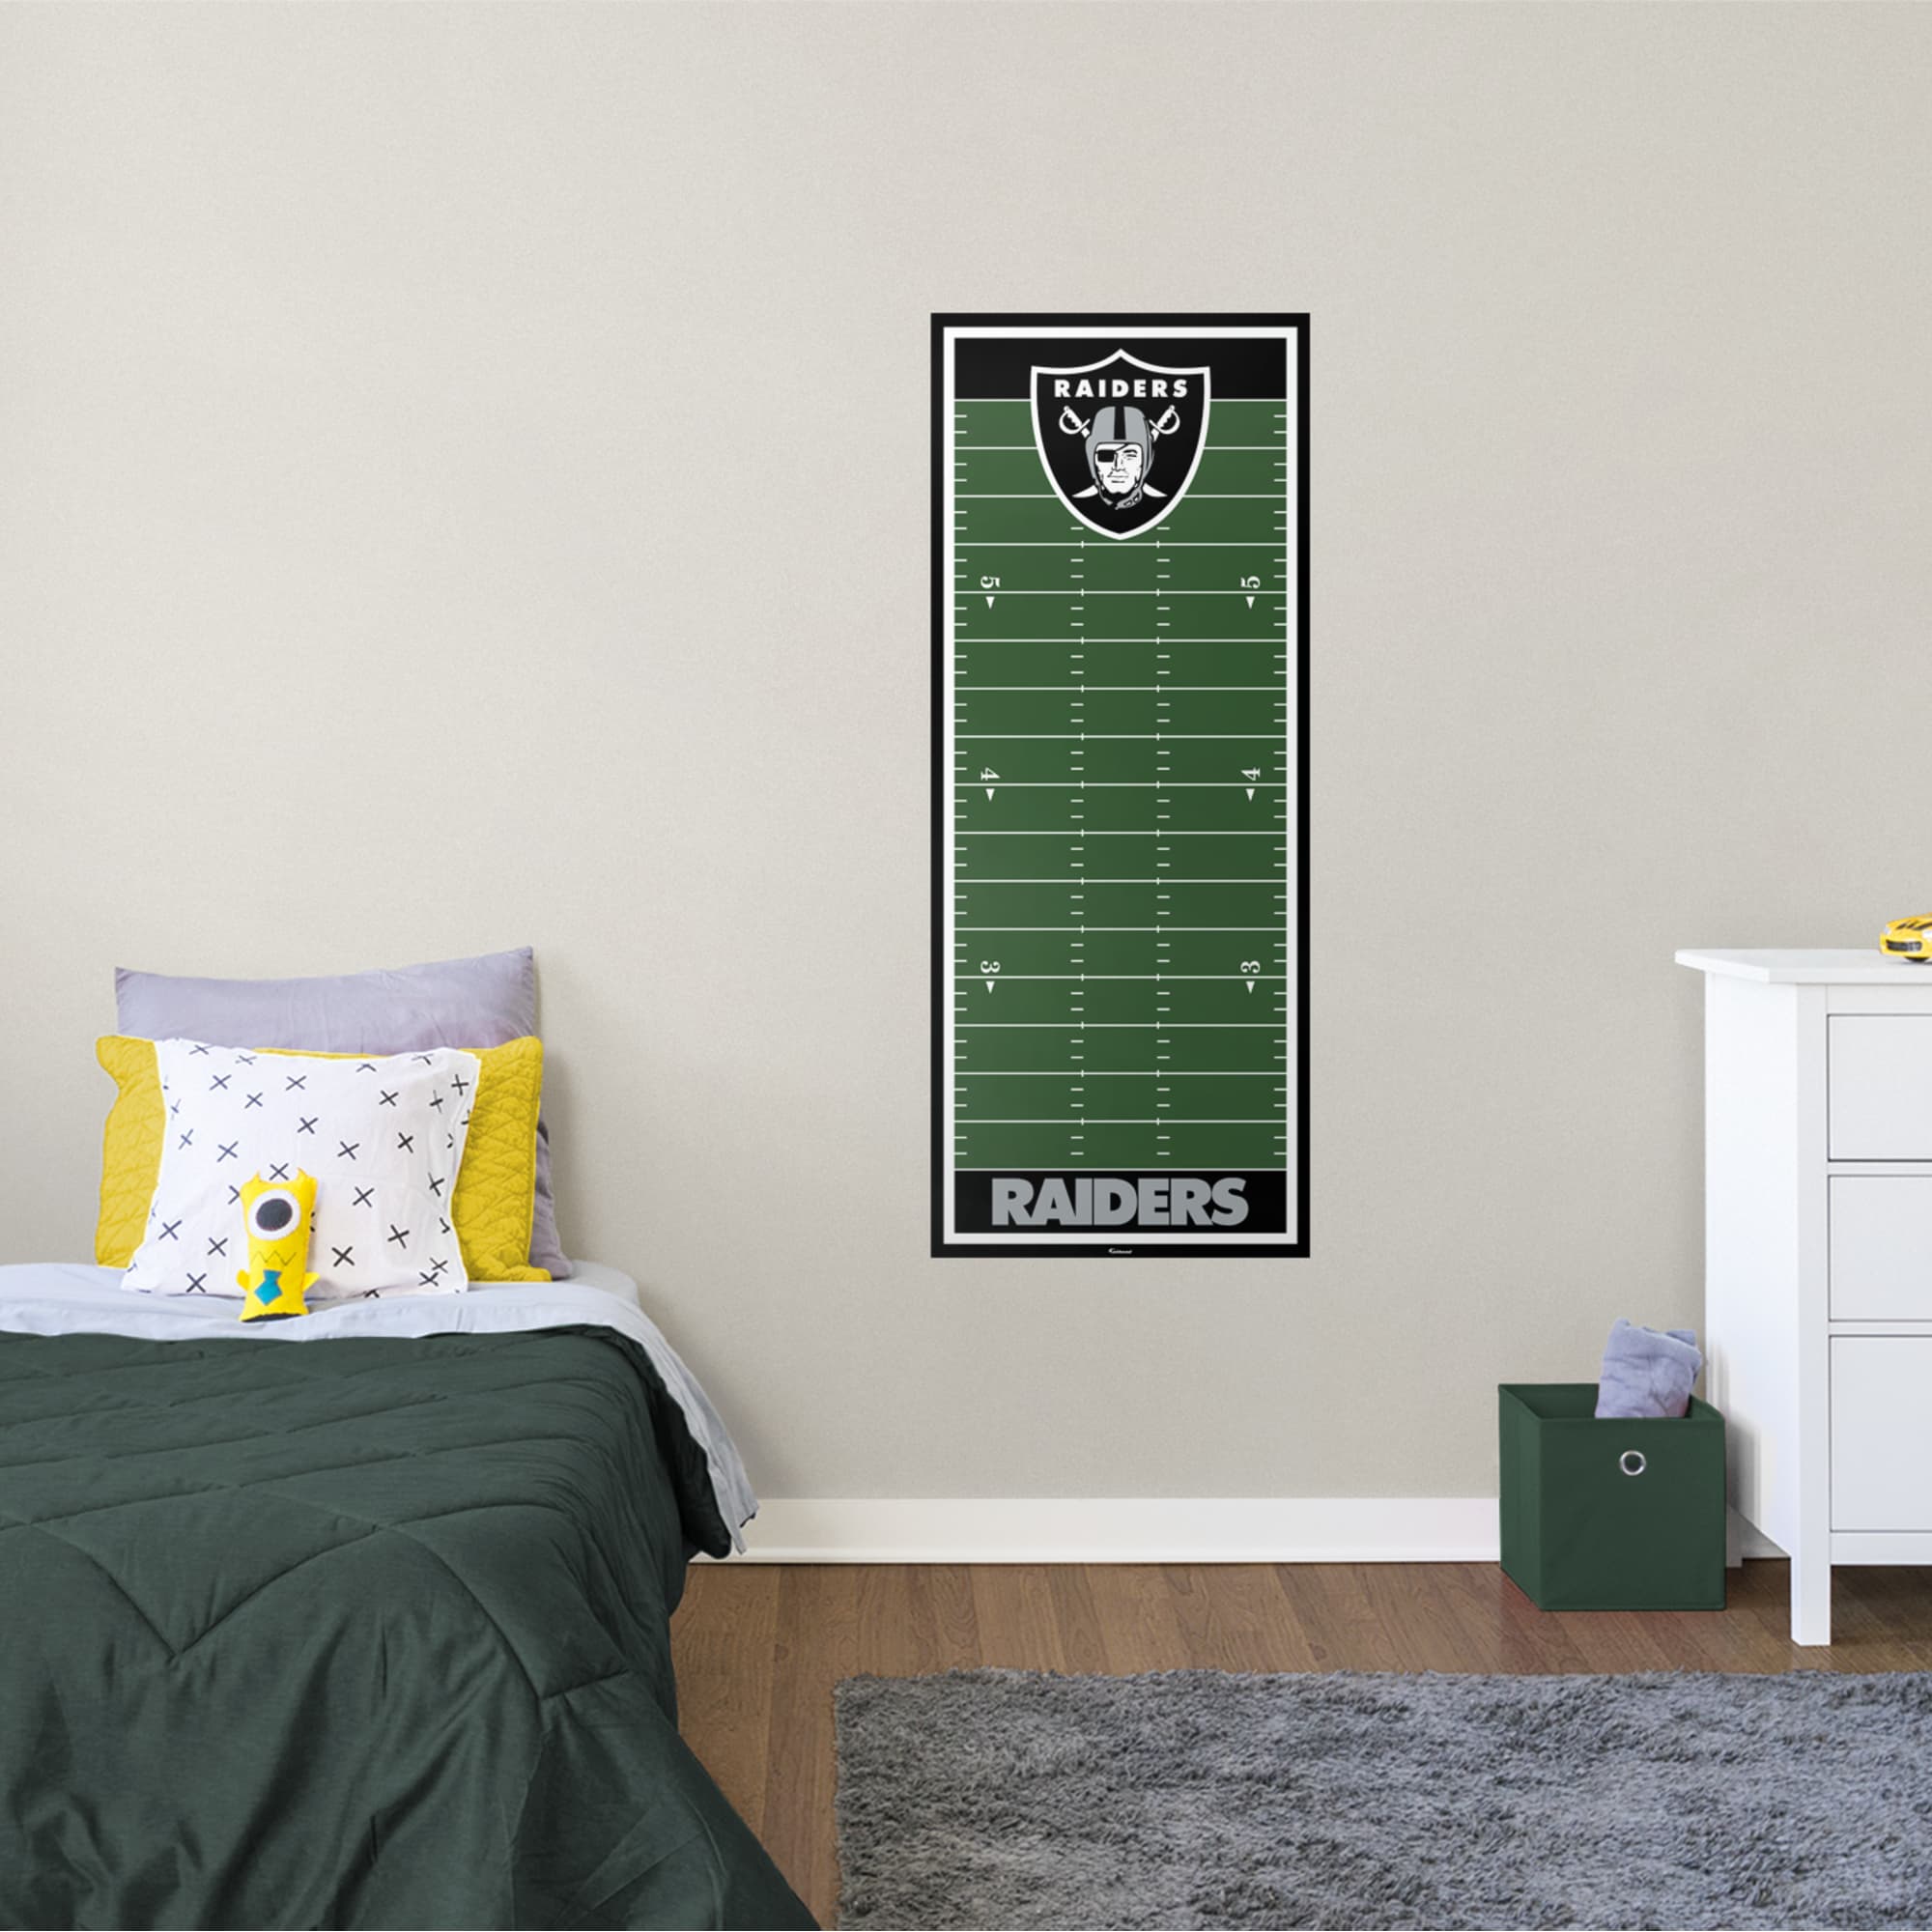 Las Vegas Raiders: Growth Chart - Officially Licensed NFL Removable Wall Graphic 24.0"W x 59.0"H by Fathead | Vinyl